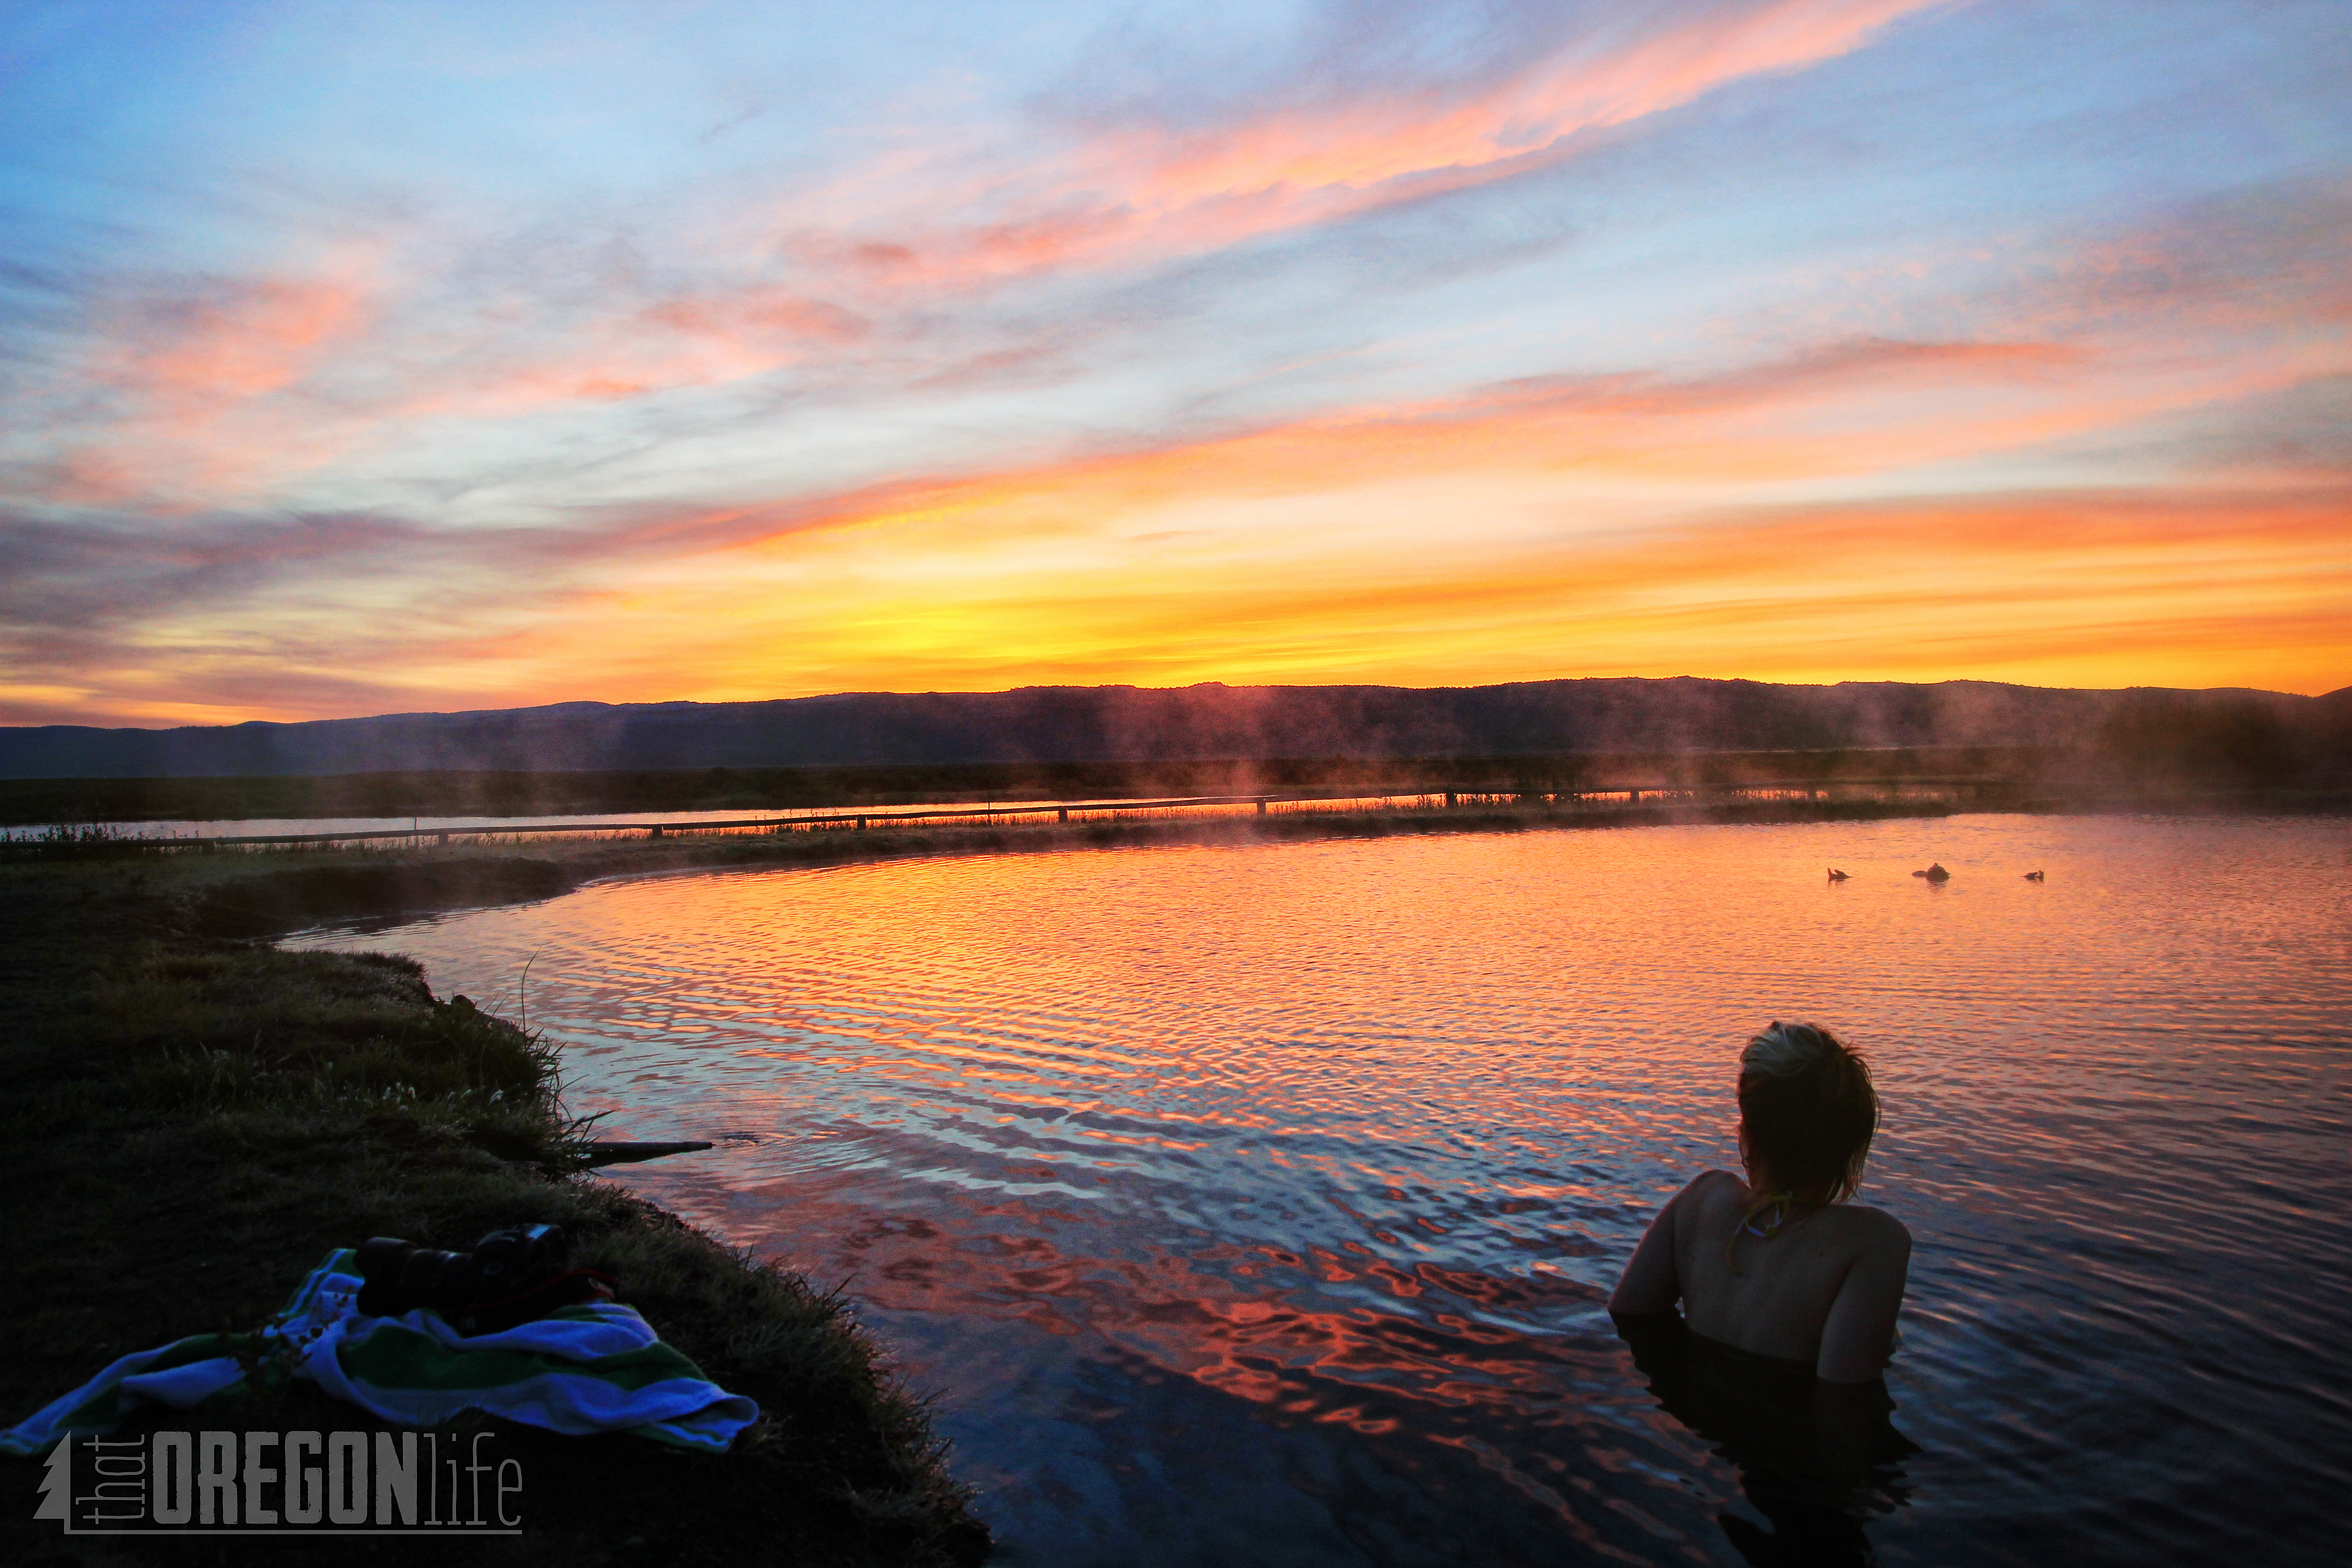 A woman soaks in the hot springs at sunset in the high desert.